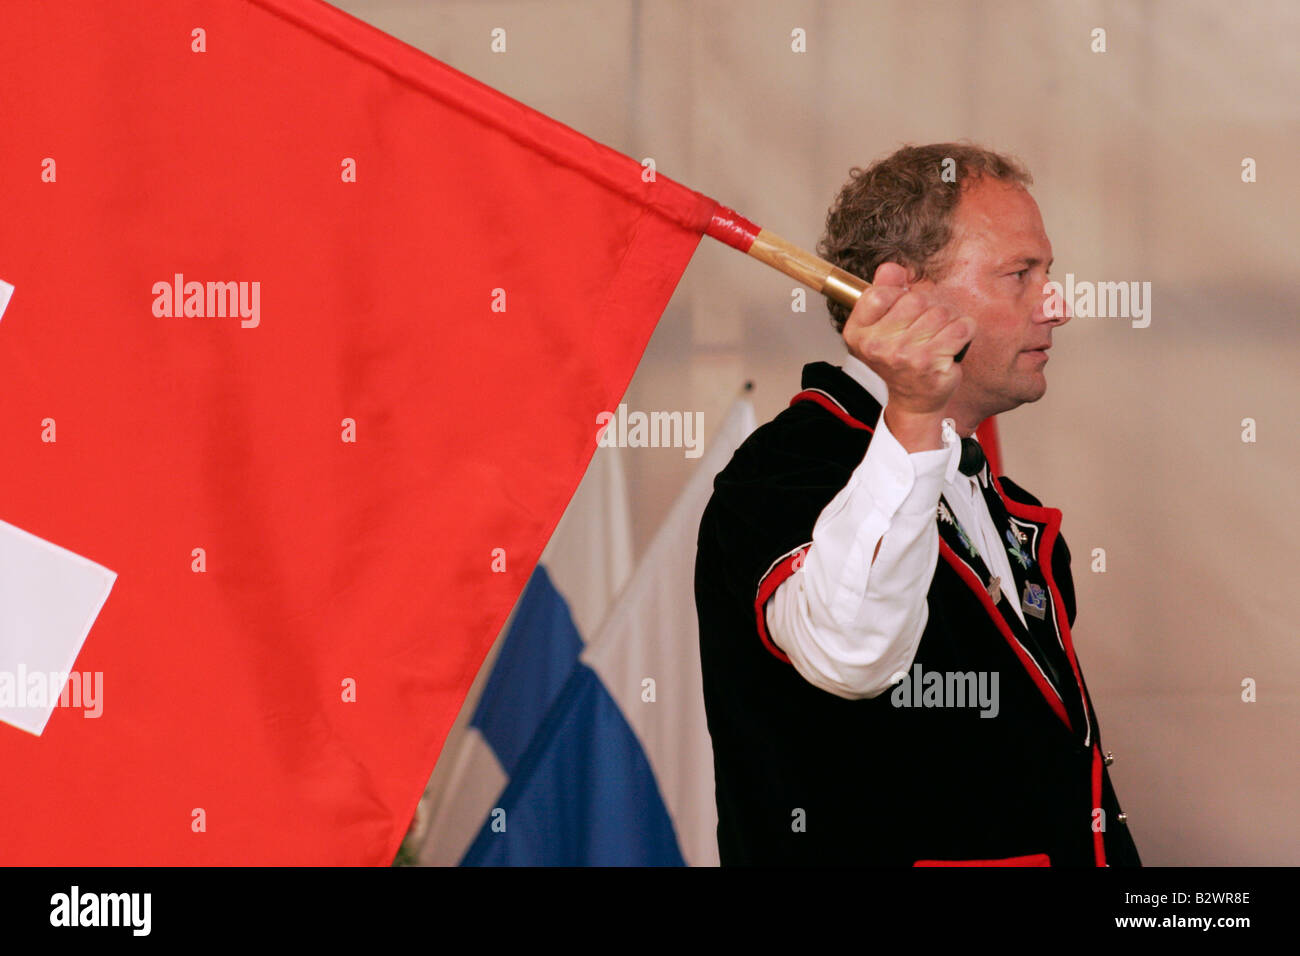 Swiss man in traditional costume competes in flag throwing during Jodlerfest in Malters, near Lucerne, Central Switzerland Stock Photo